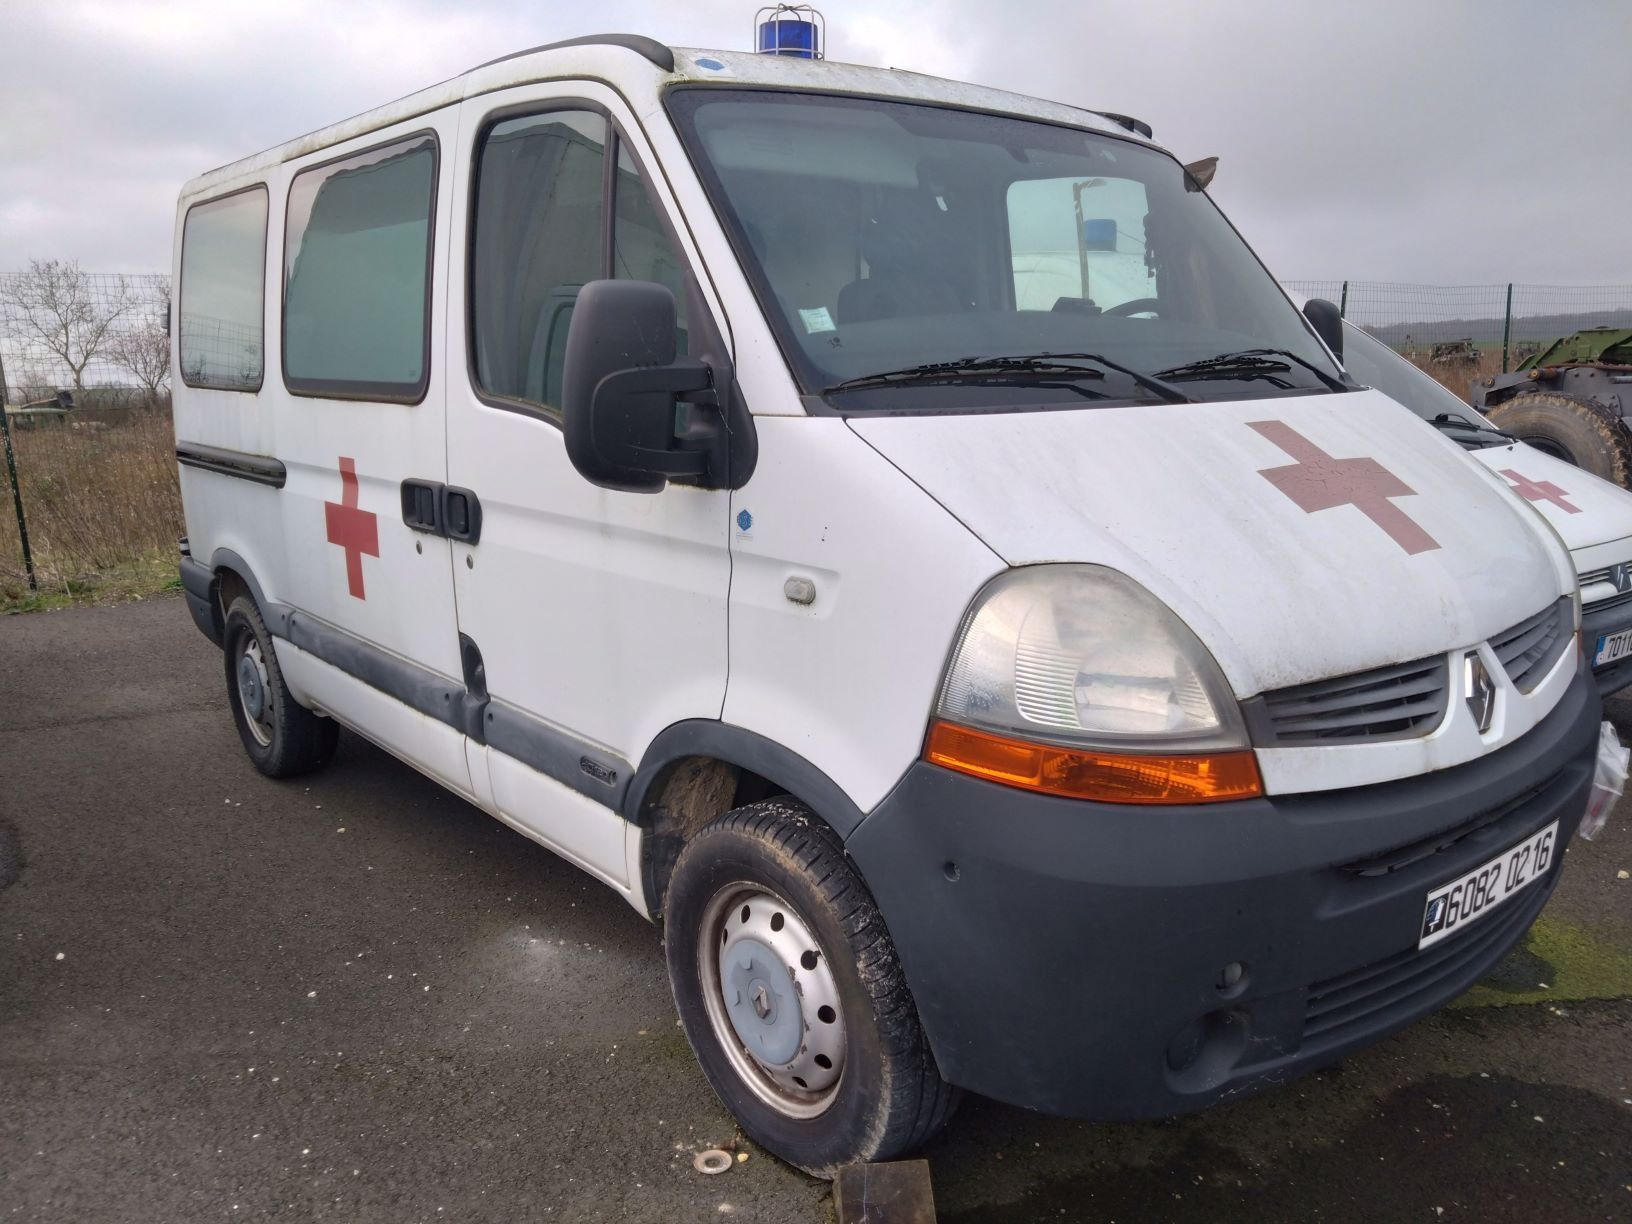 Null [RP][ACI] Reserved for automotive professionals.
Ambulance RENAULT Master, &hellip;